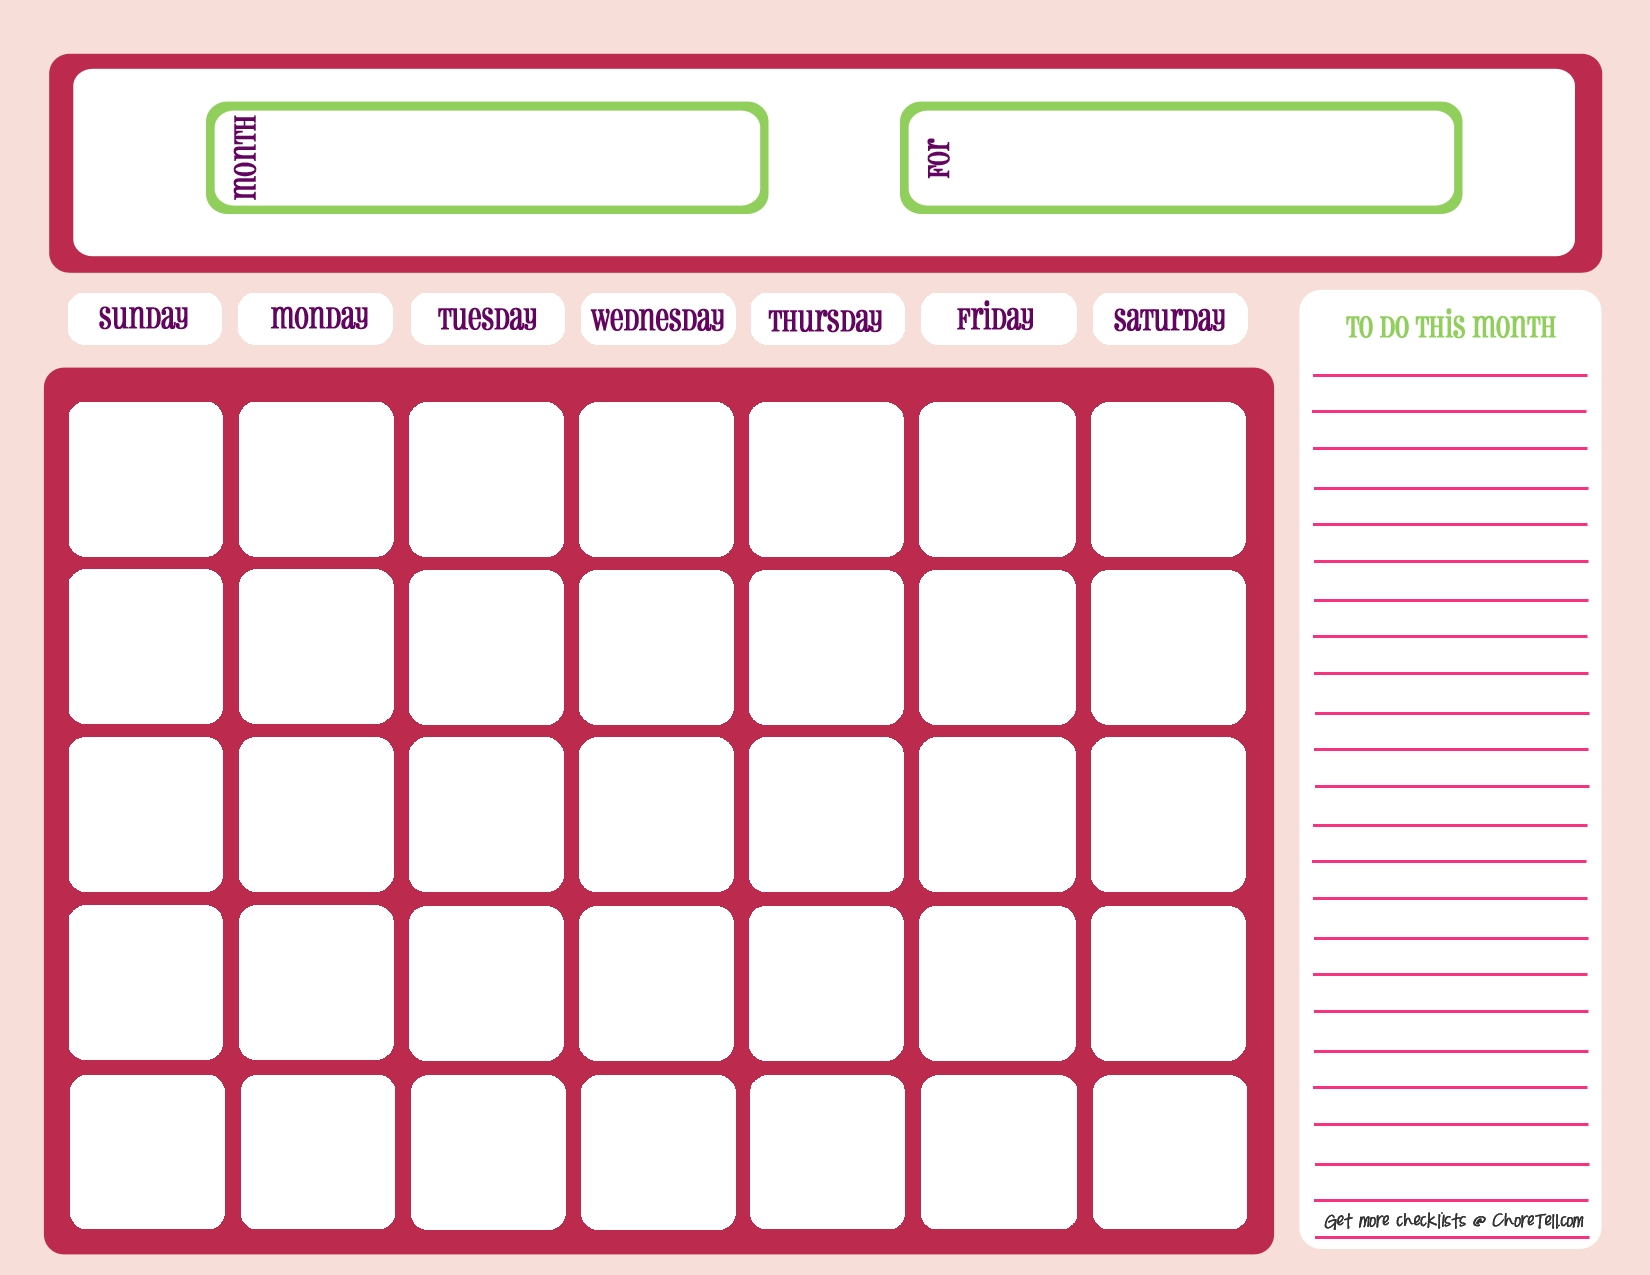 Blank Month Calendar - Pinks - Free Printable Downloads From Choretell inside Free Monthly Calendars To Print